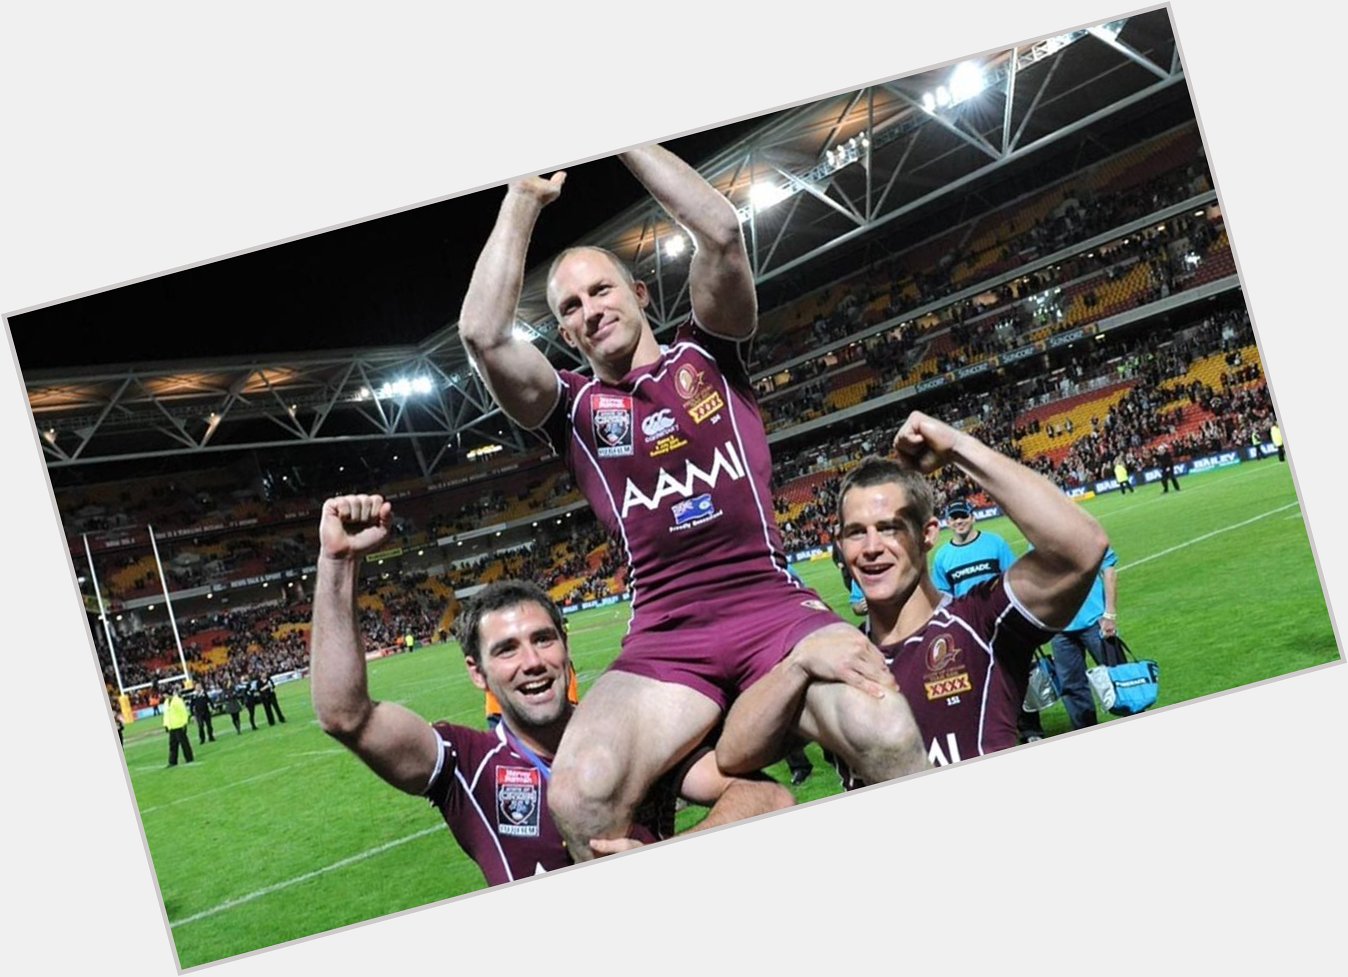 Sharing a today are two sporting legends, Darren Lockyer & Peyton Manning! Happy 40th Locky 